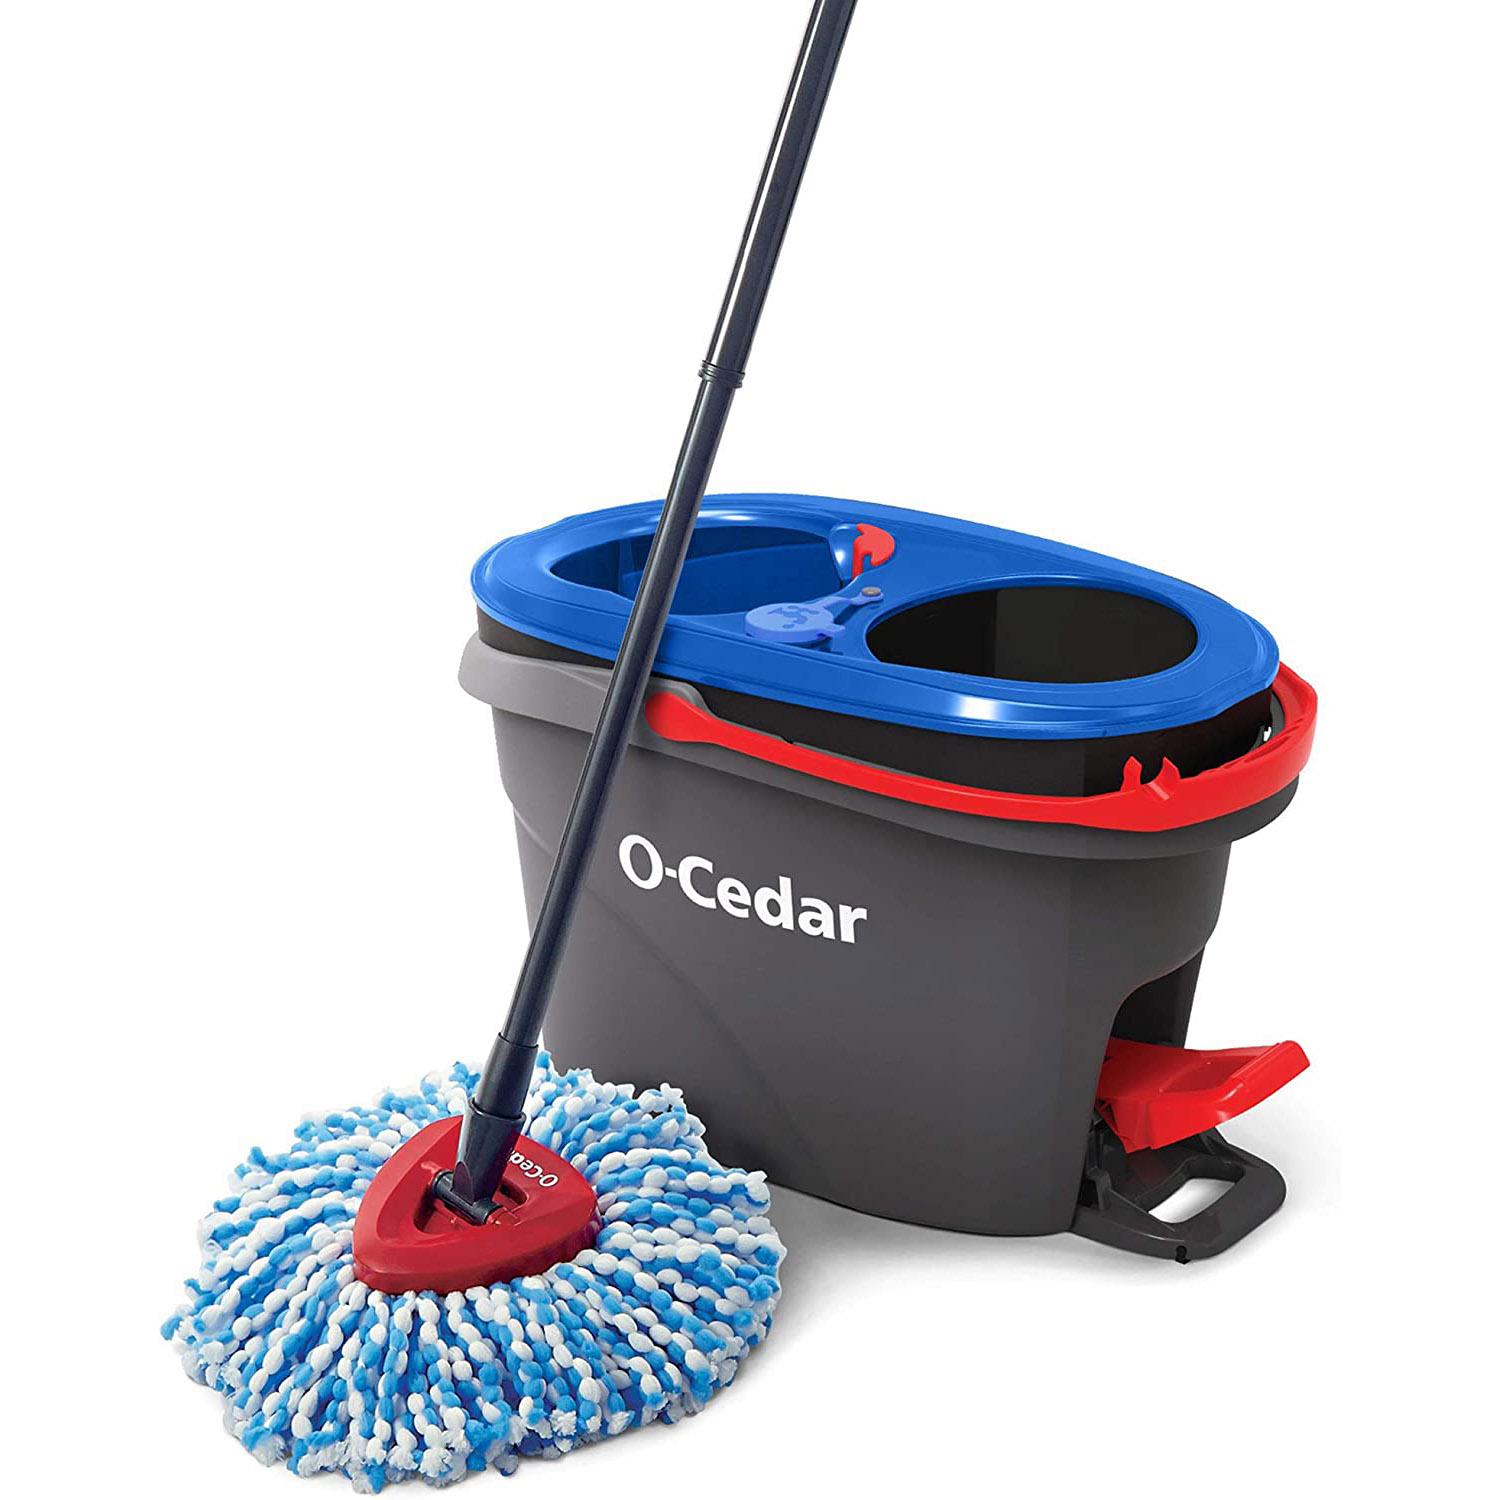 O-Cedar EasyWring RinseClean Microfiber Spin Mop and Bucket for $35.71 Shipped